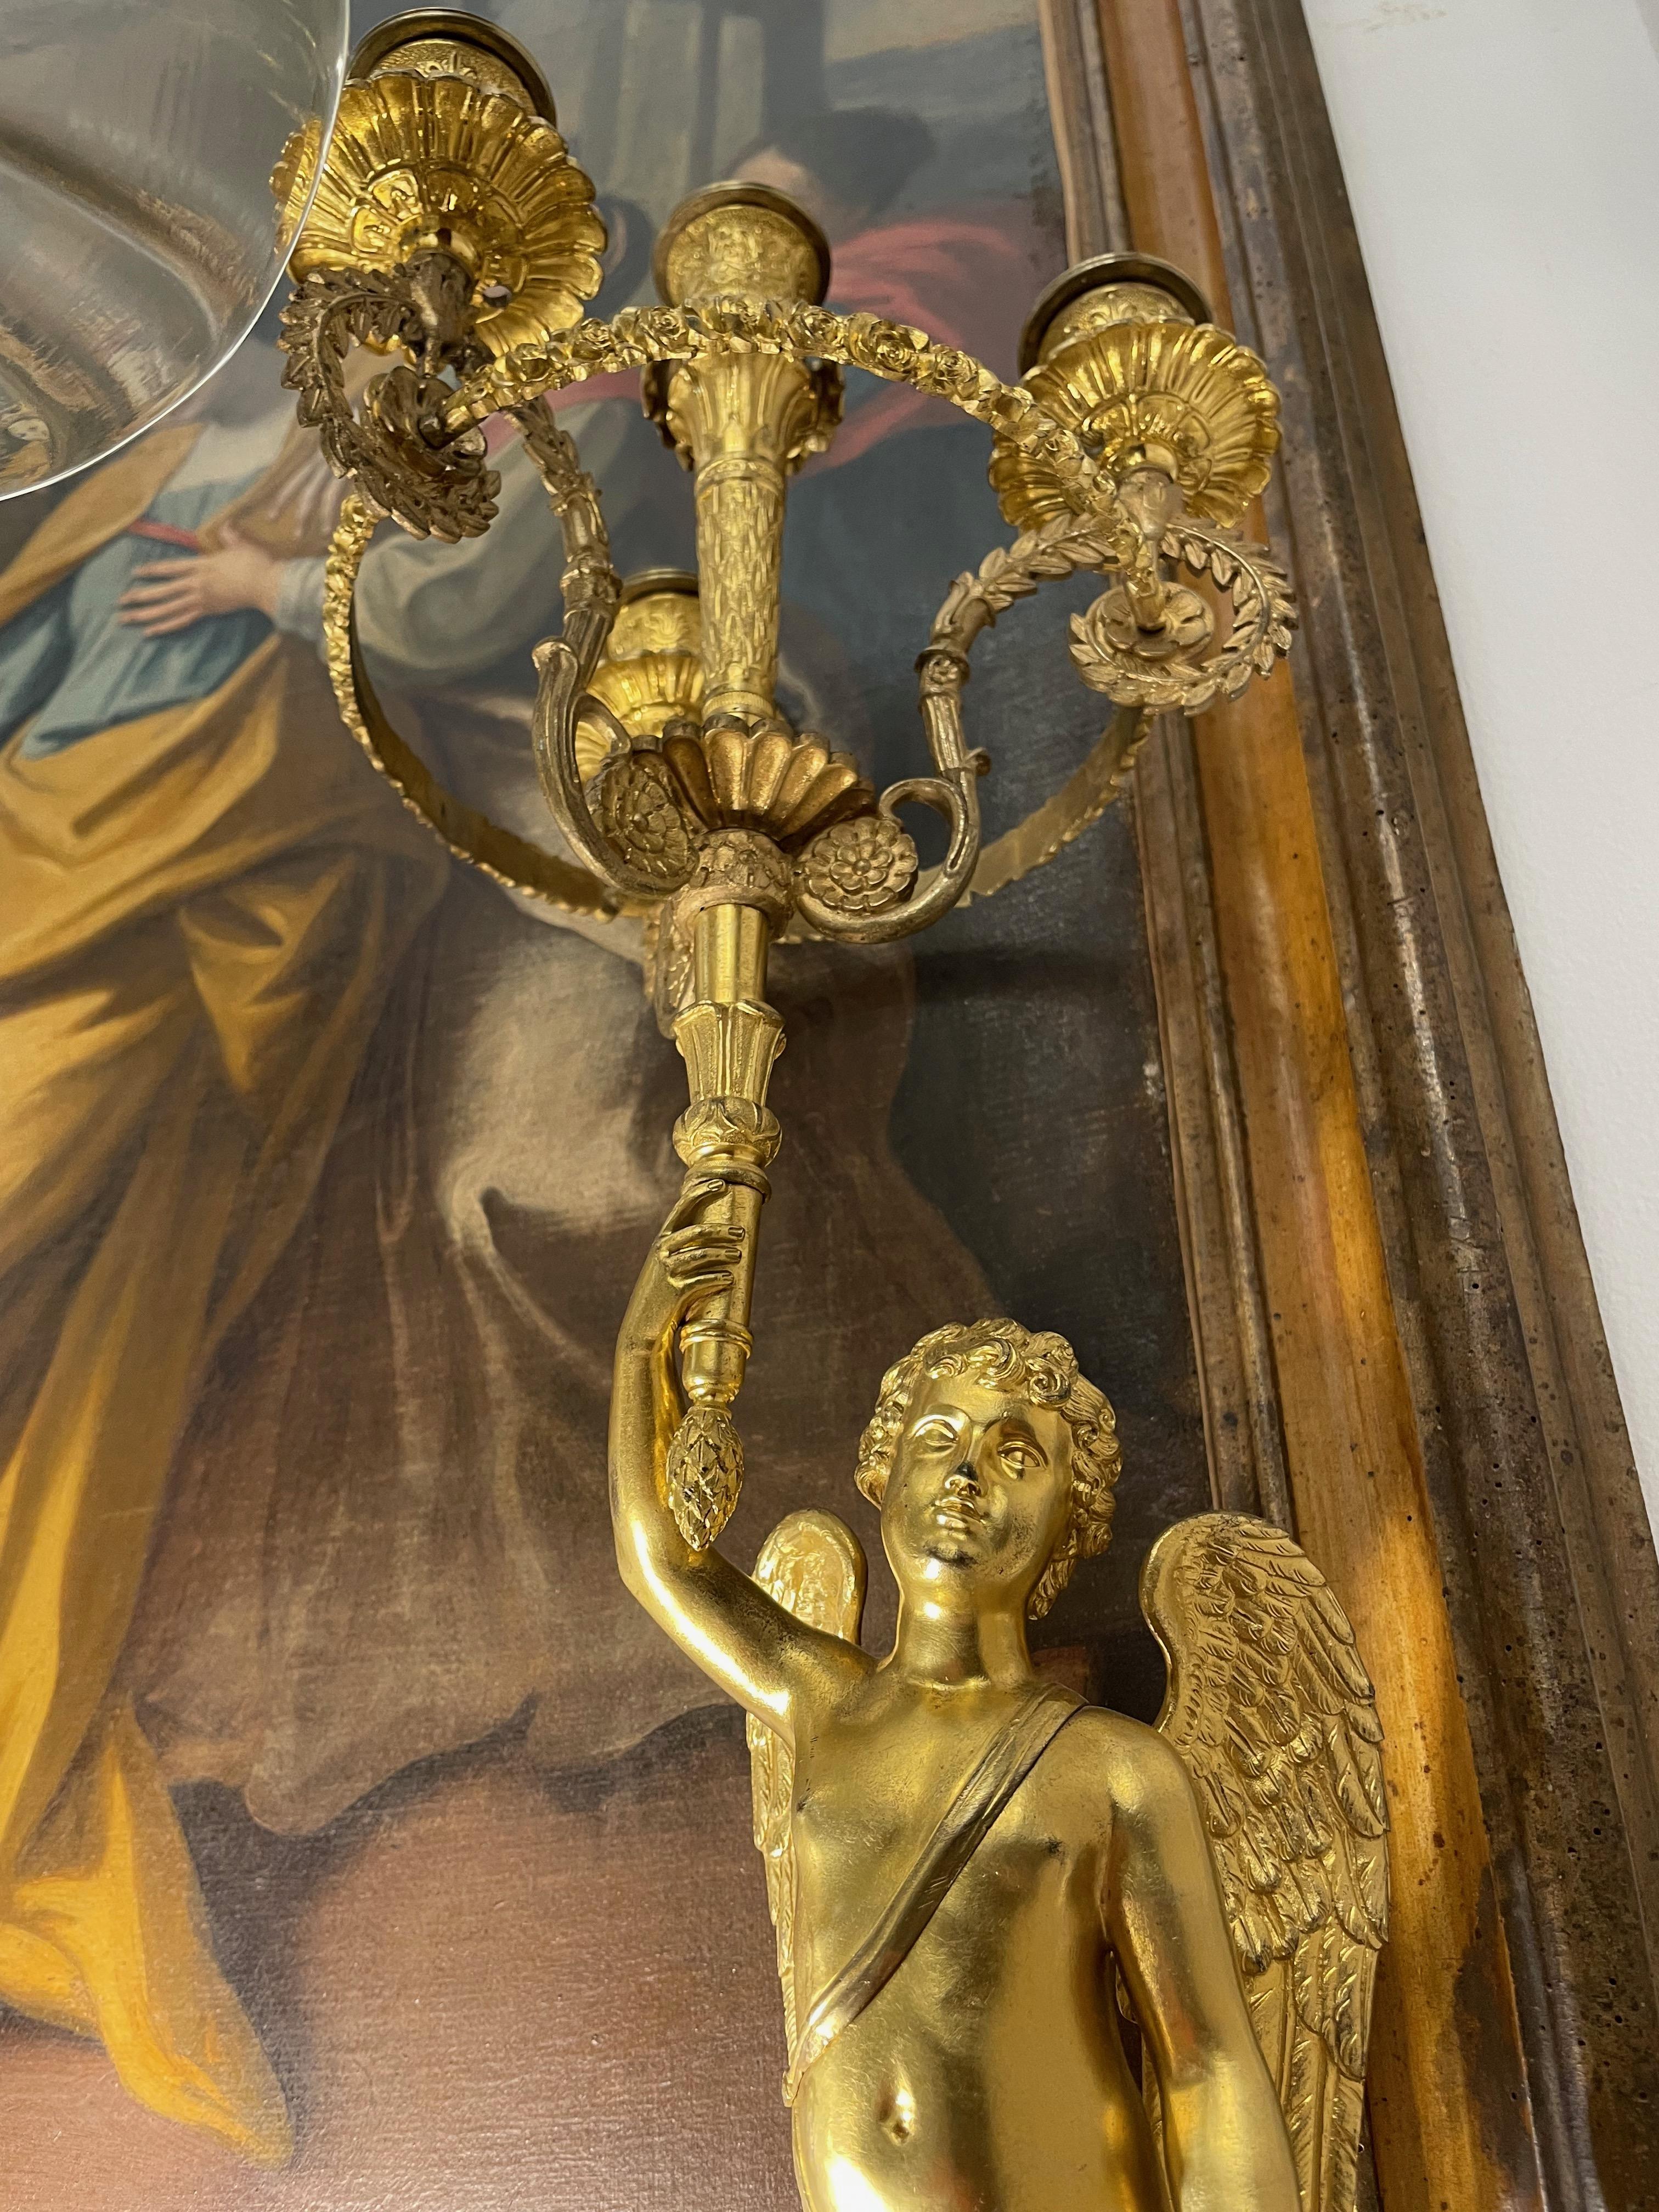 19th Century French Pair of Empire Candelabra Gilded Flambeaux with Putti For Sale 3